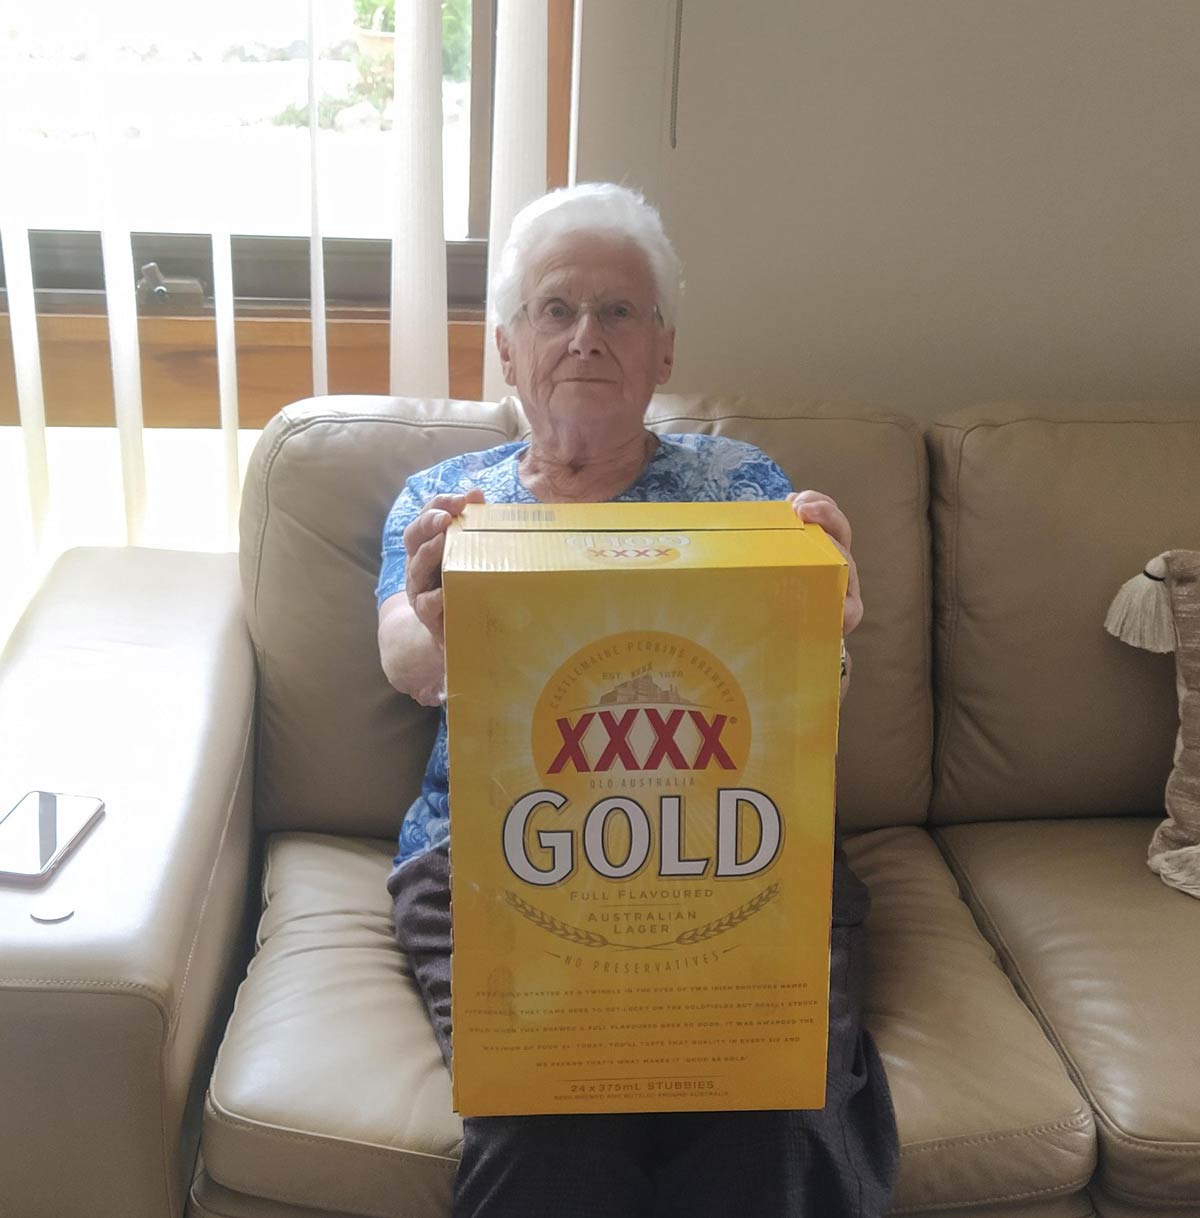 I buy nan a slab (case) of beer every Xmas. It's the only present we'll buy anyone each year, guaranteed to be what they want